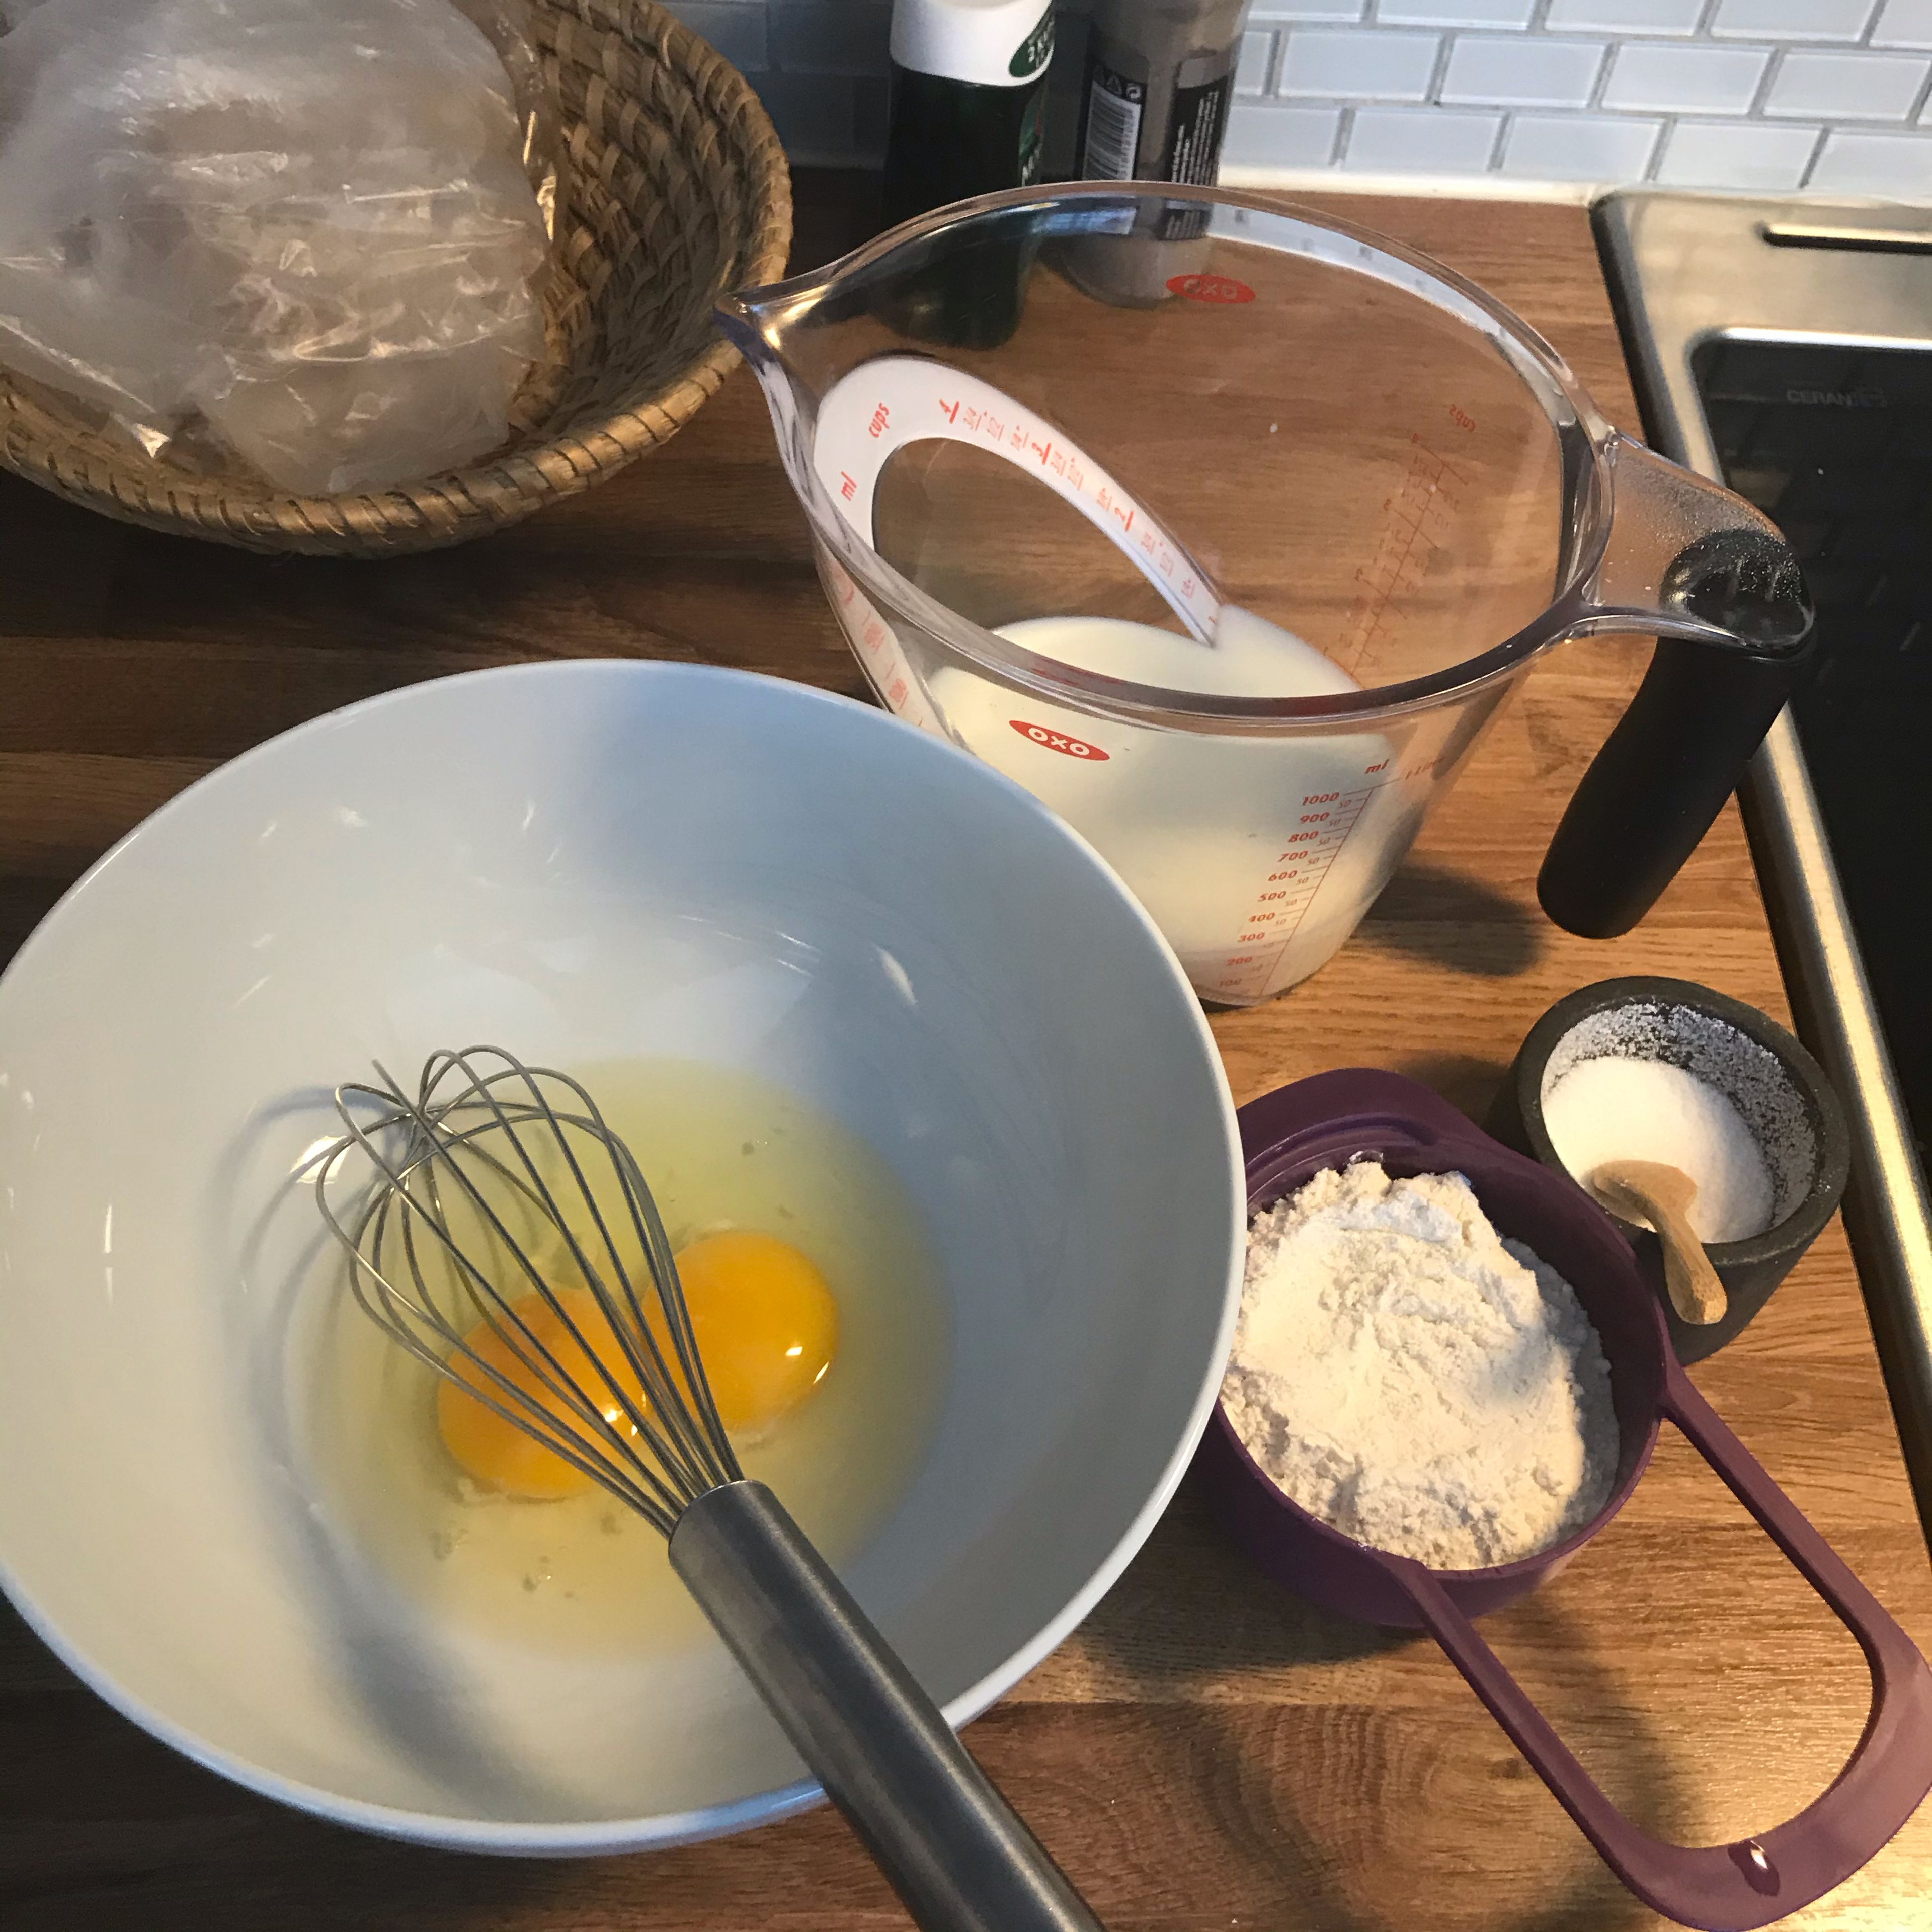 In a large mixing bowl, whisk together the flour and the eggs. Gradually add in the milk while, stirring to combine. Add the salt and oil and beat until smooth.